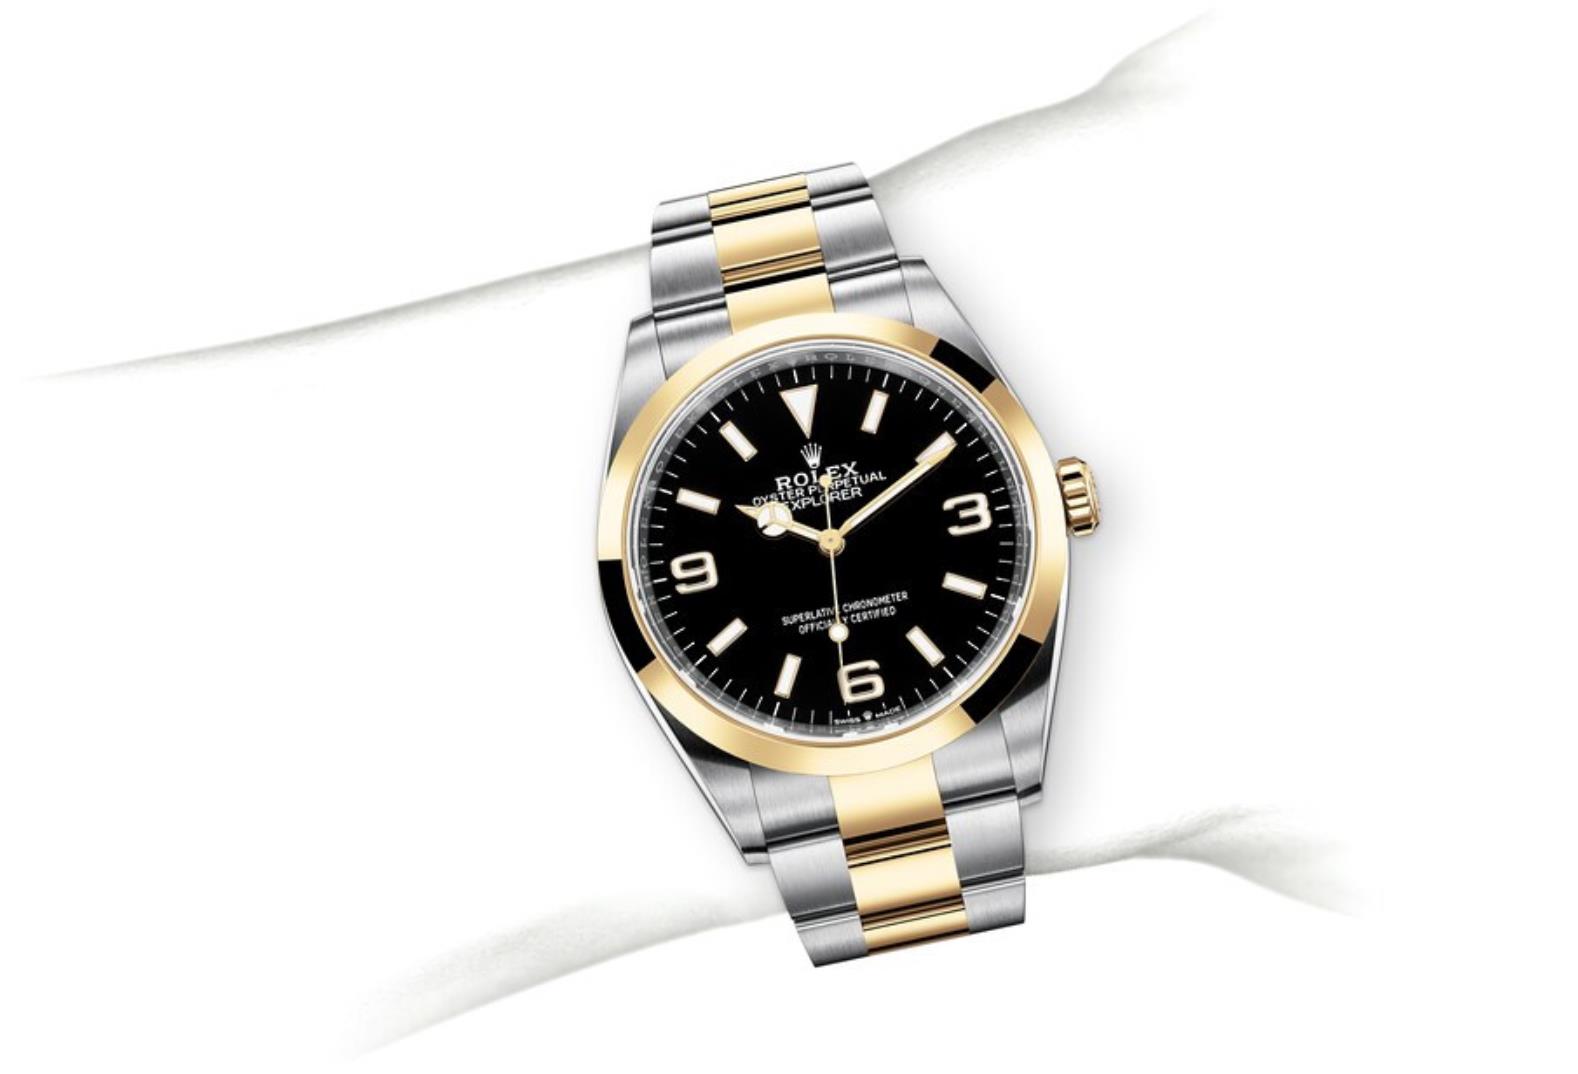 The 36mm fake watch is designed for women.